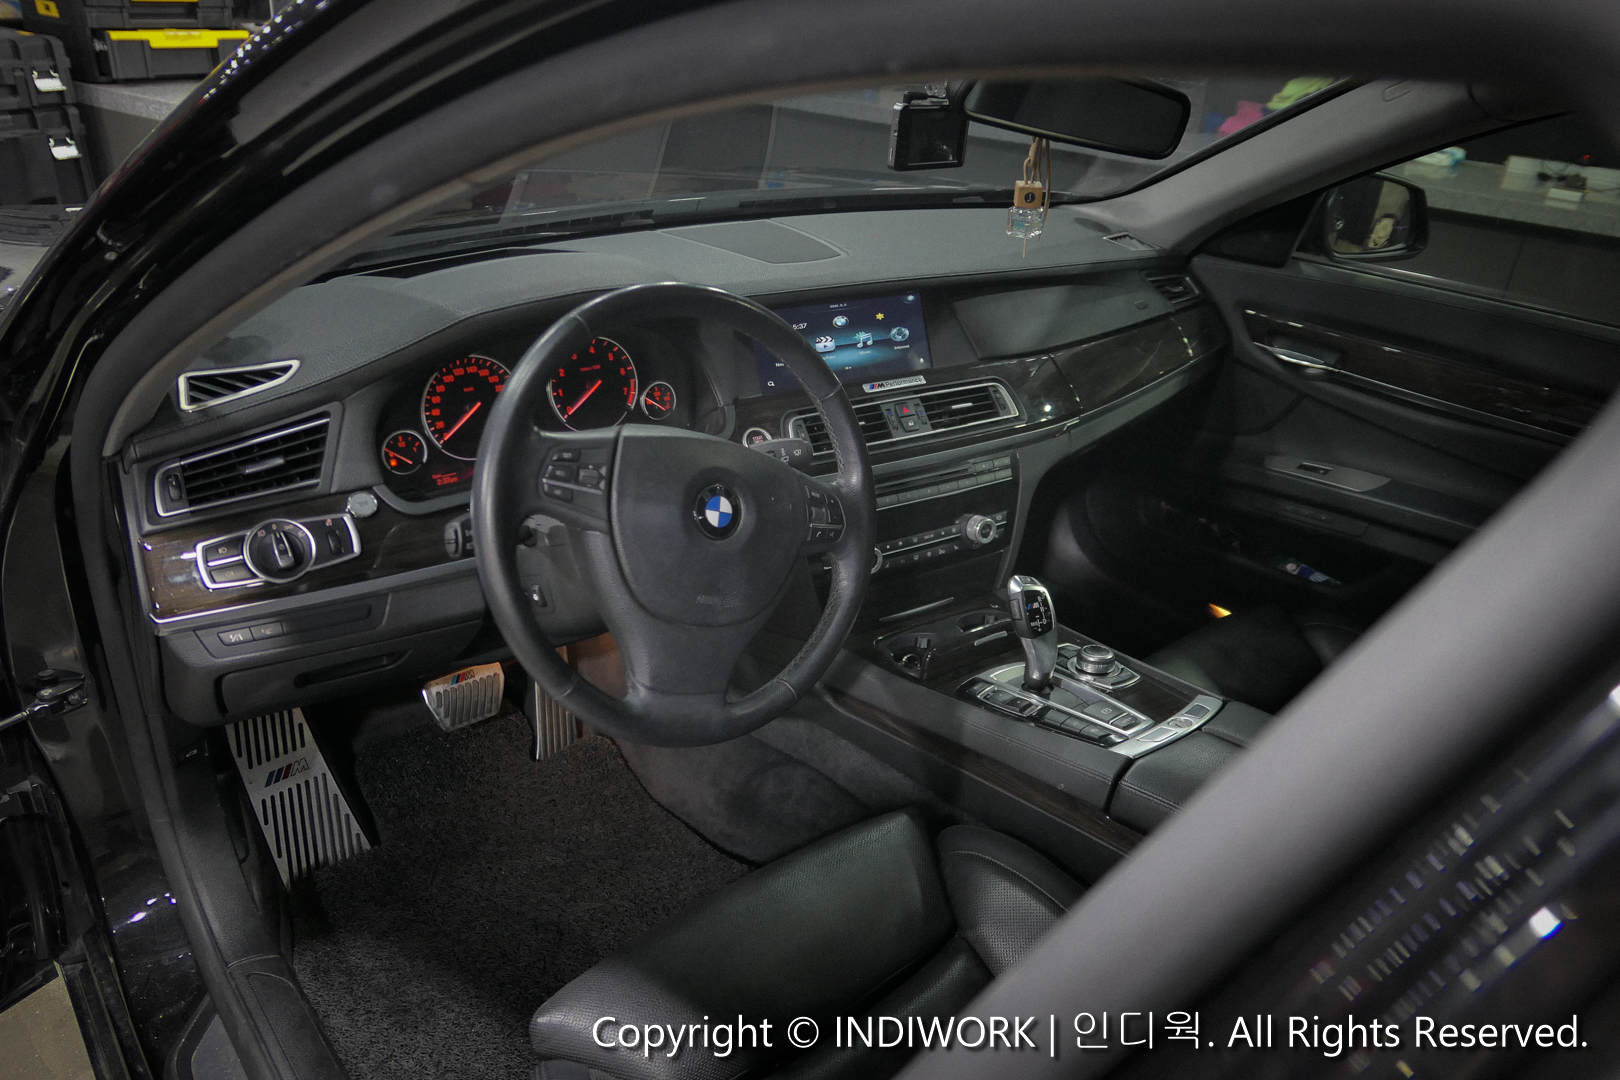 Android Car PC for 2011 BMW F02 7Series "A-LINK V2"